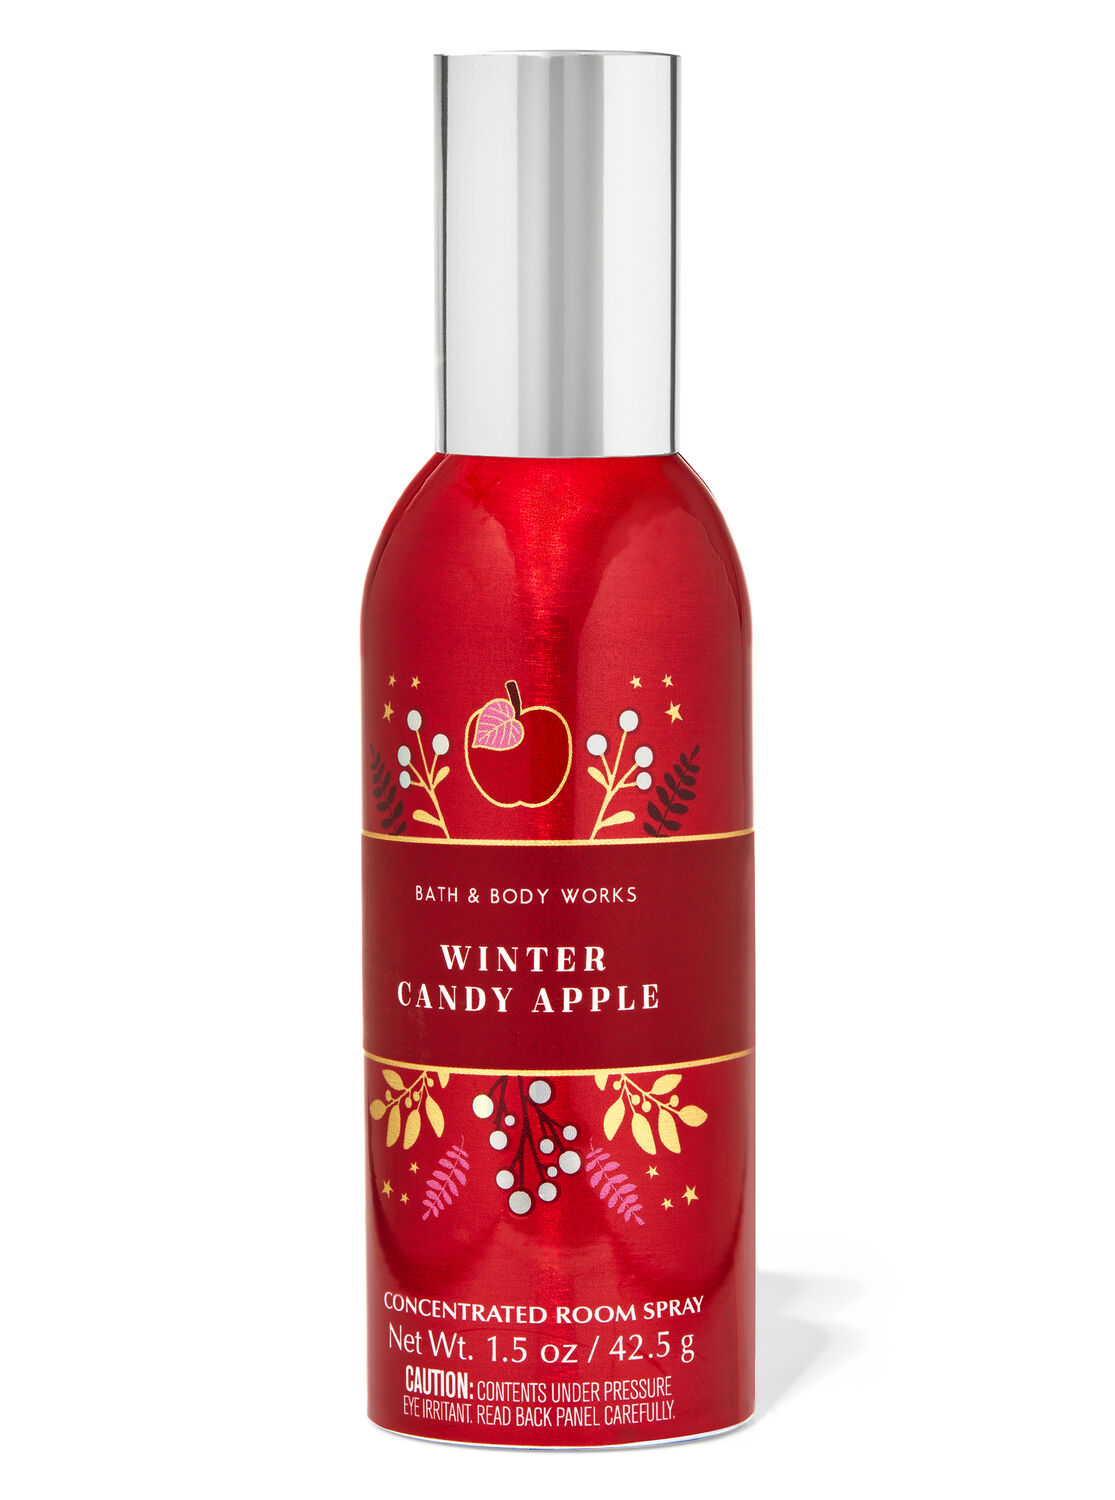 Winter Candy Apple Concentrated Room Spray